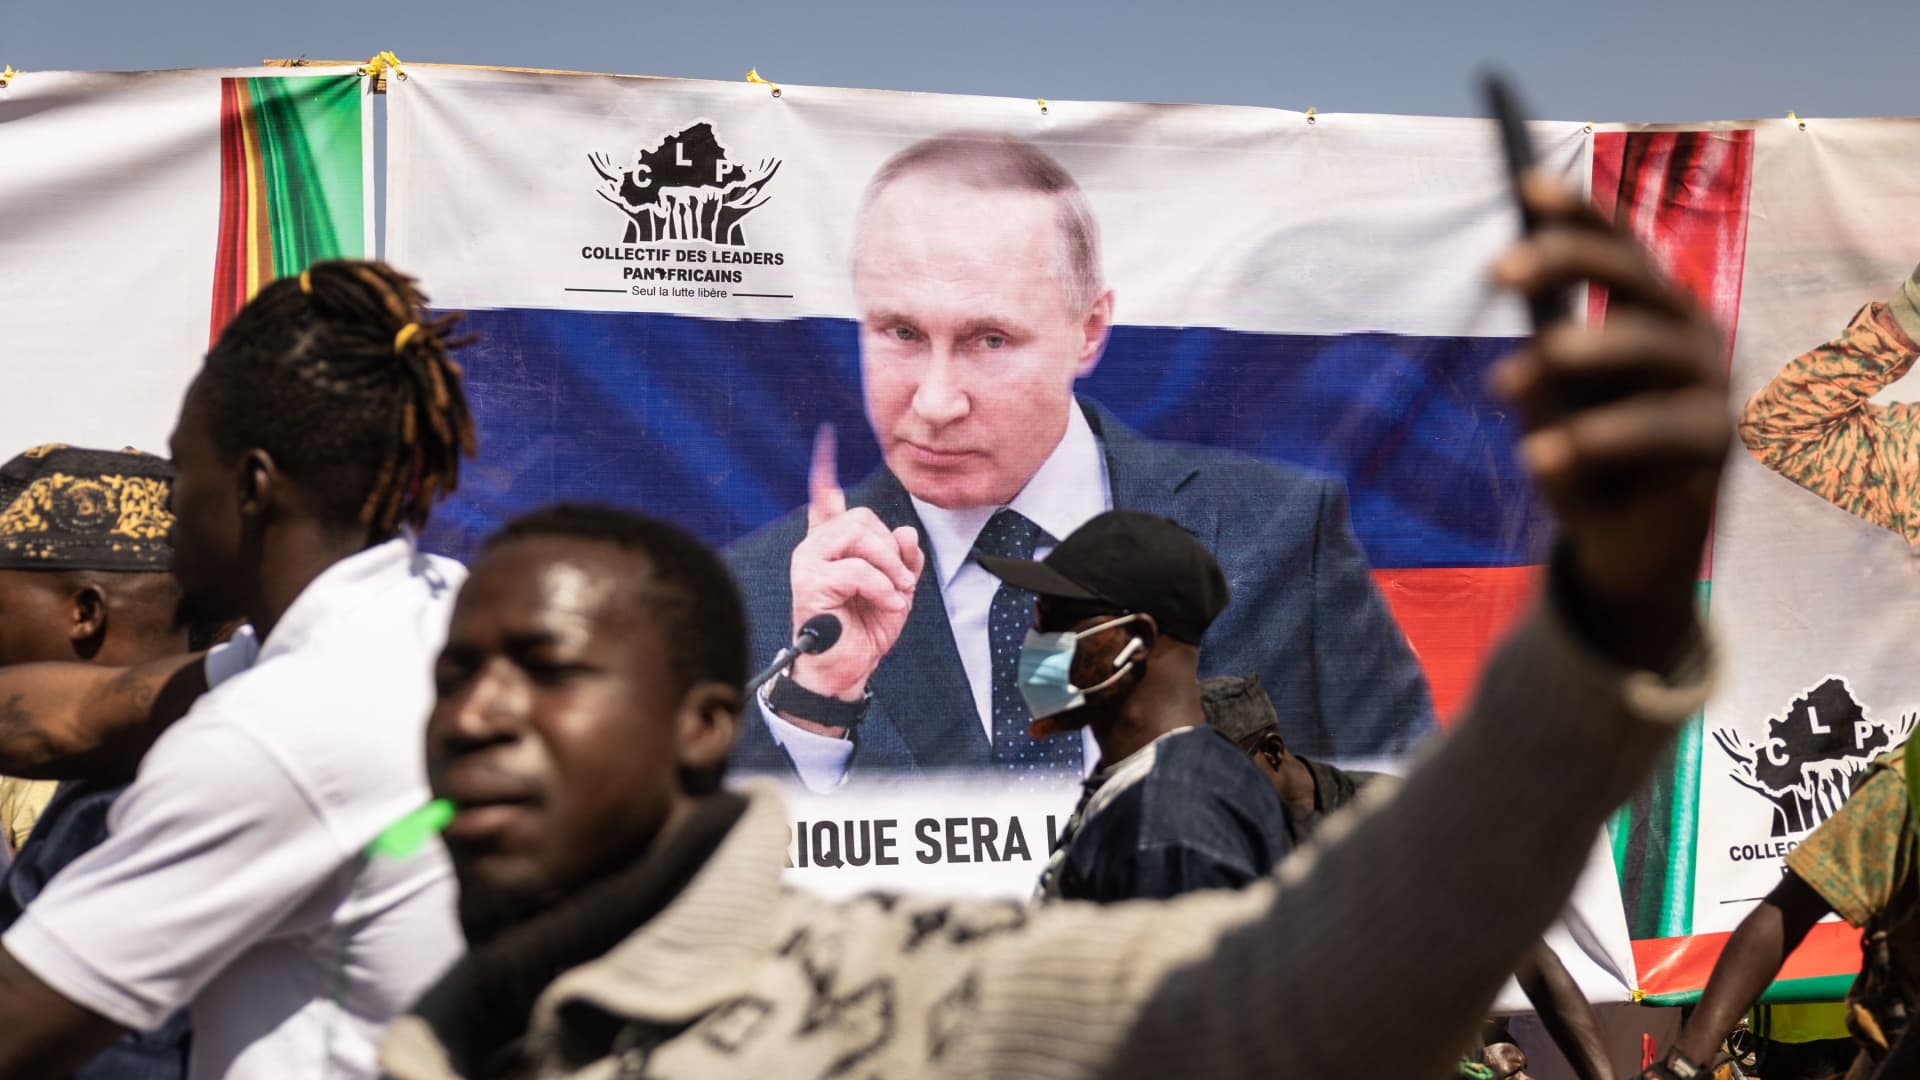 'It's not a pretty picture': Russia's support is growing in the developing world